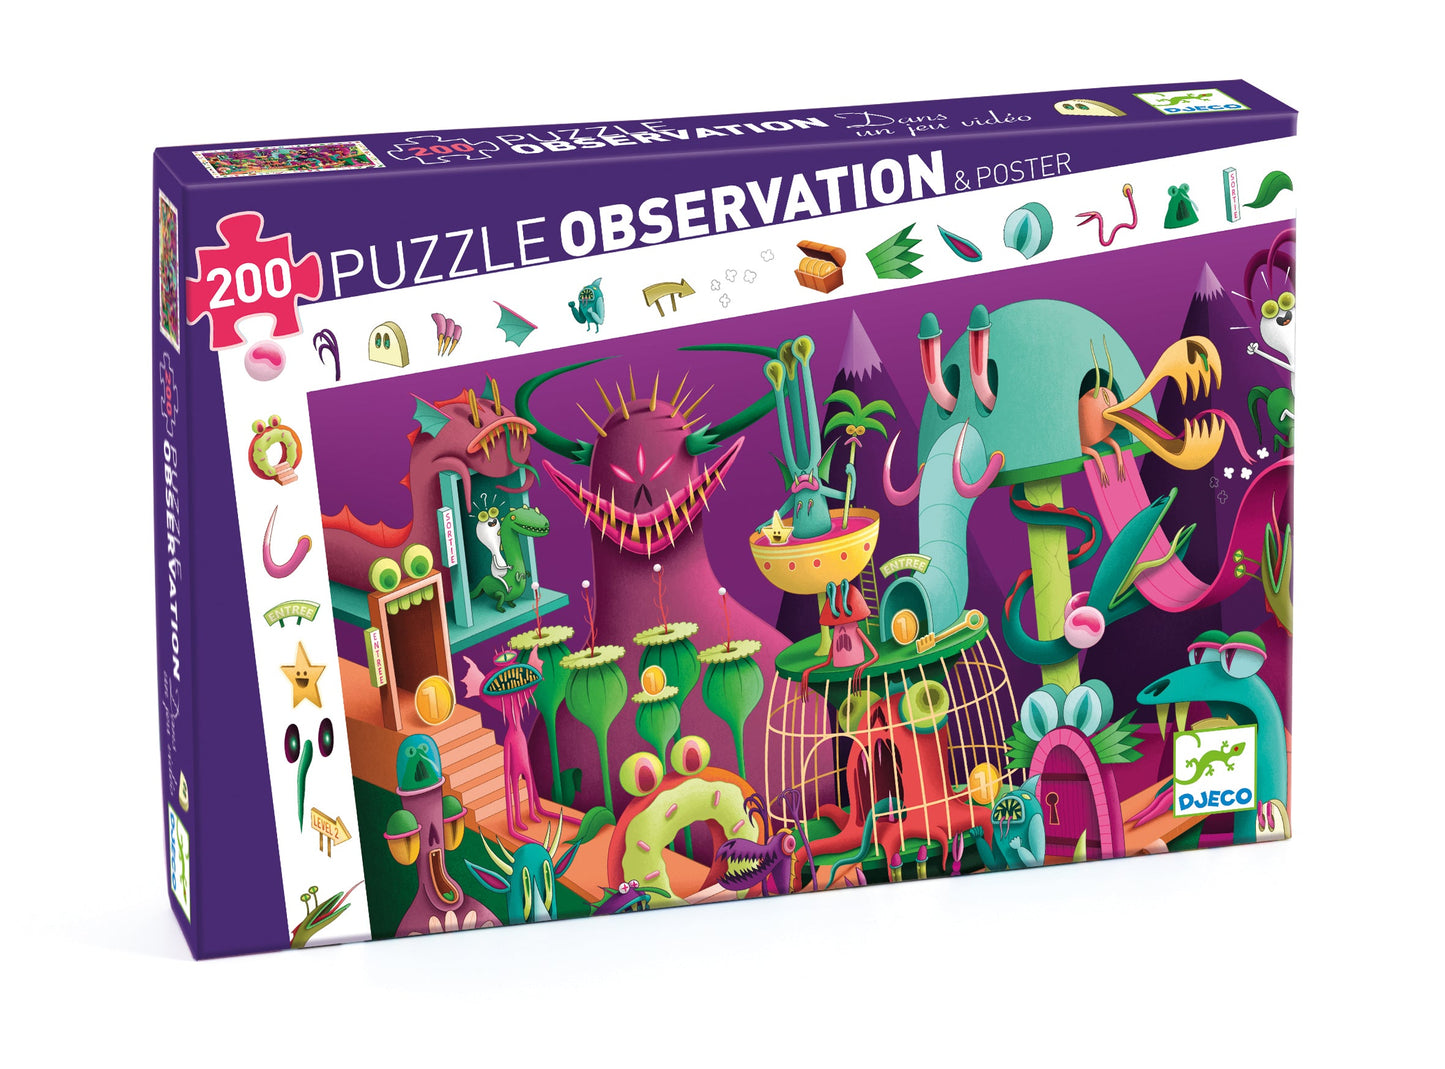 Djeco In a Video Game 200pc Observation Jigsaw Puzzle + Poster